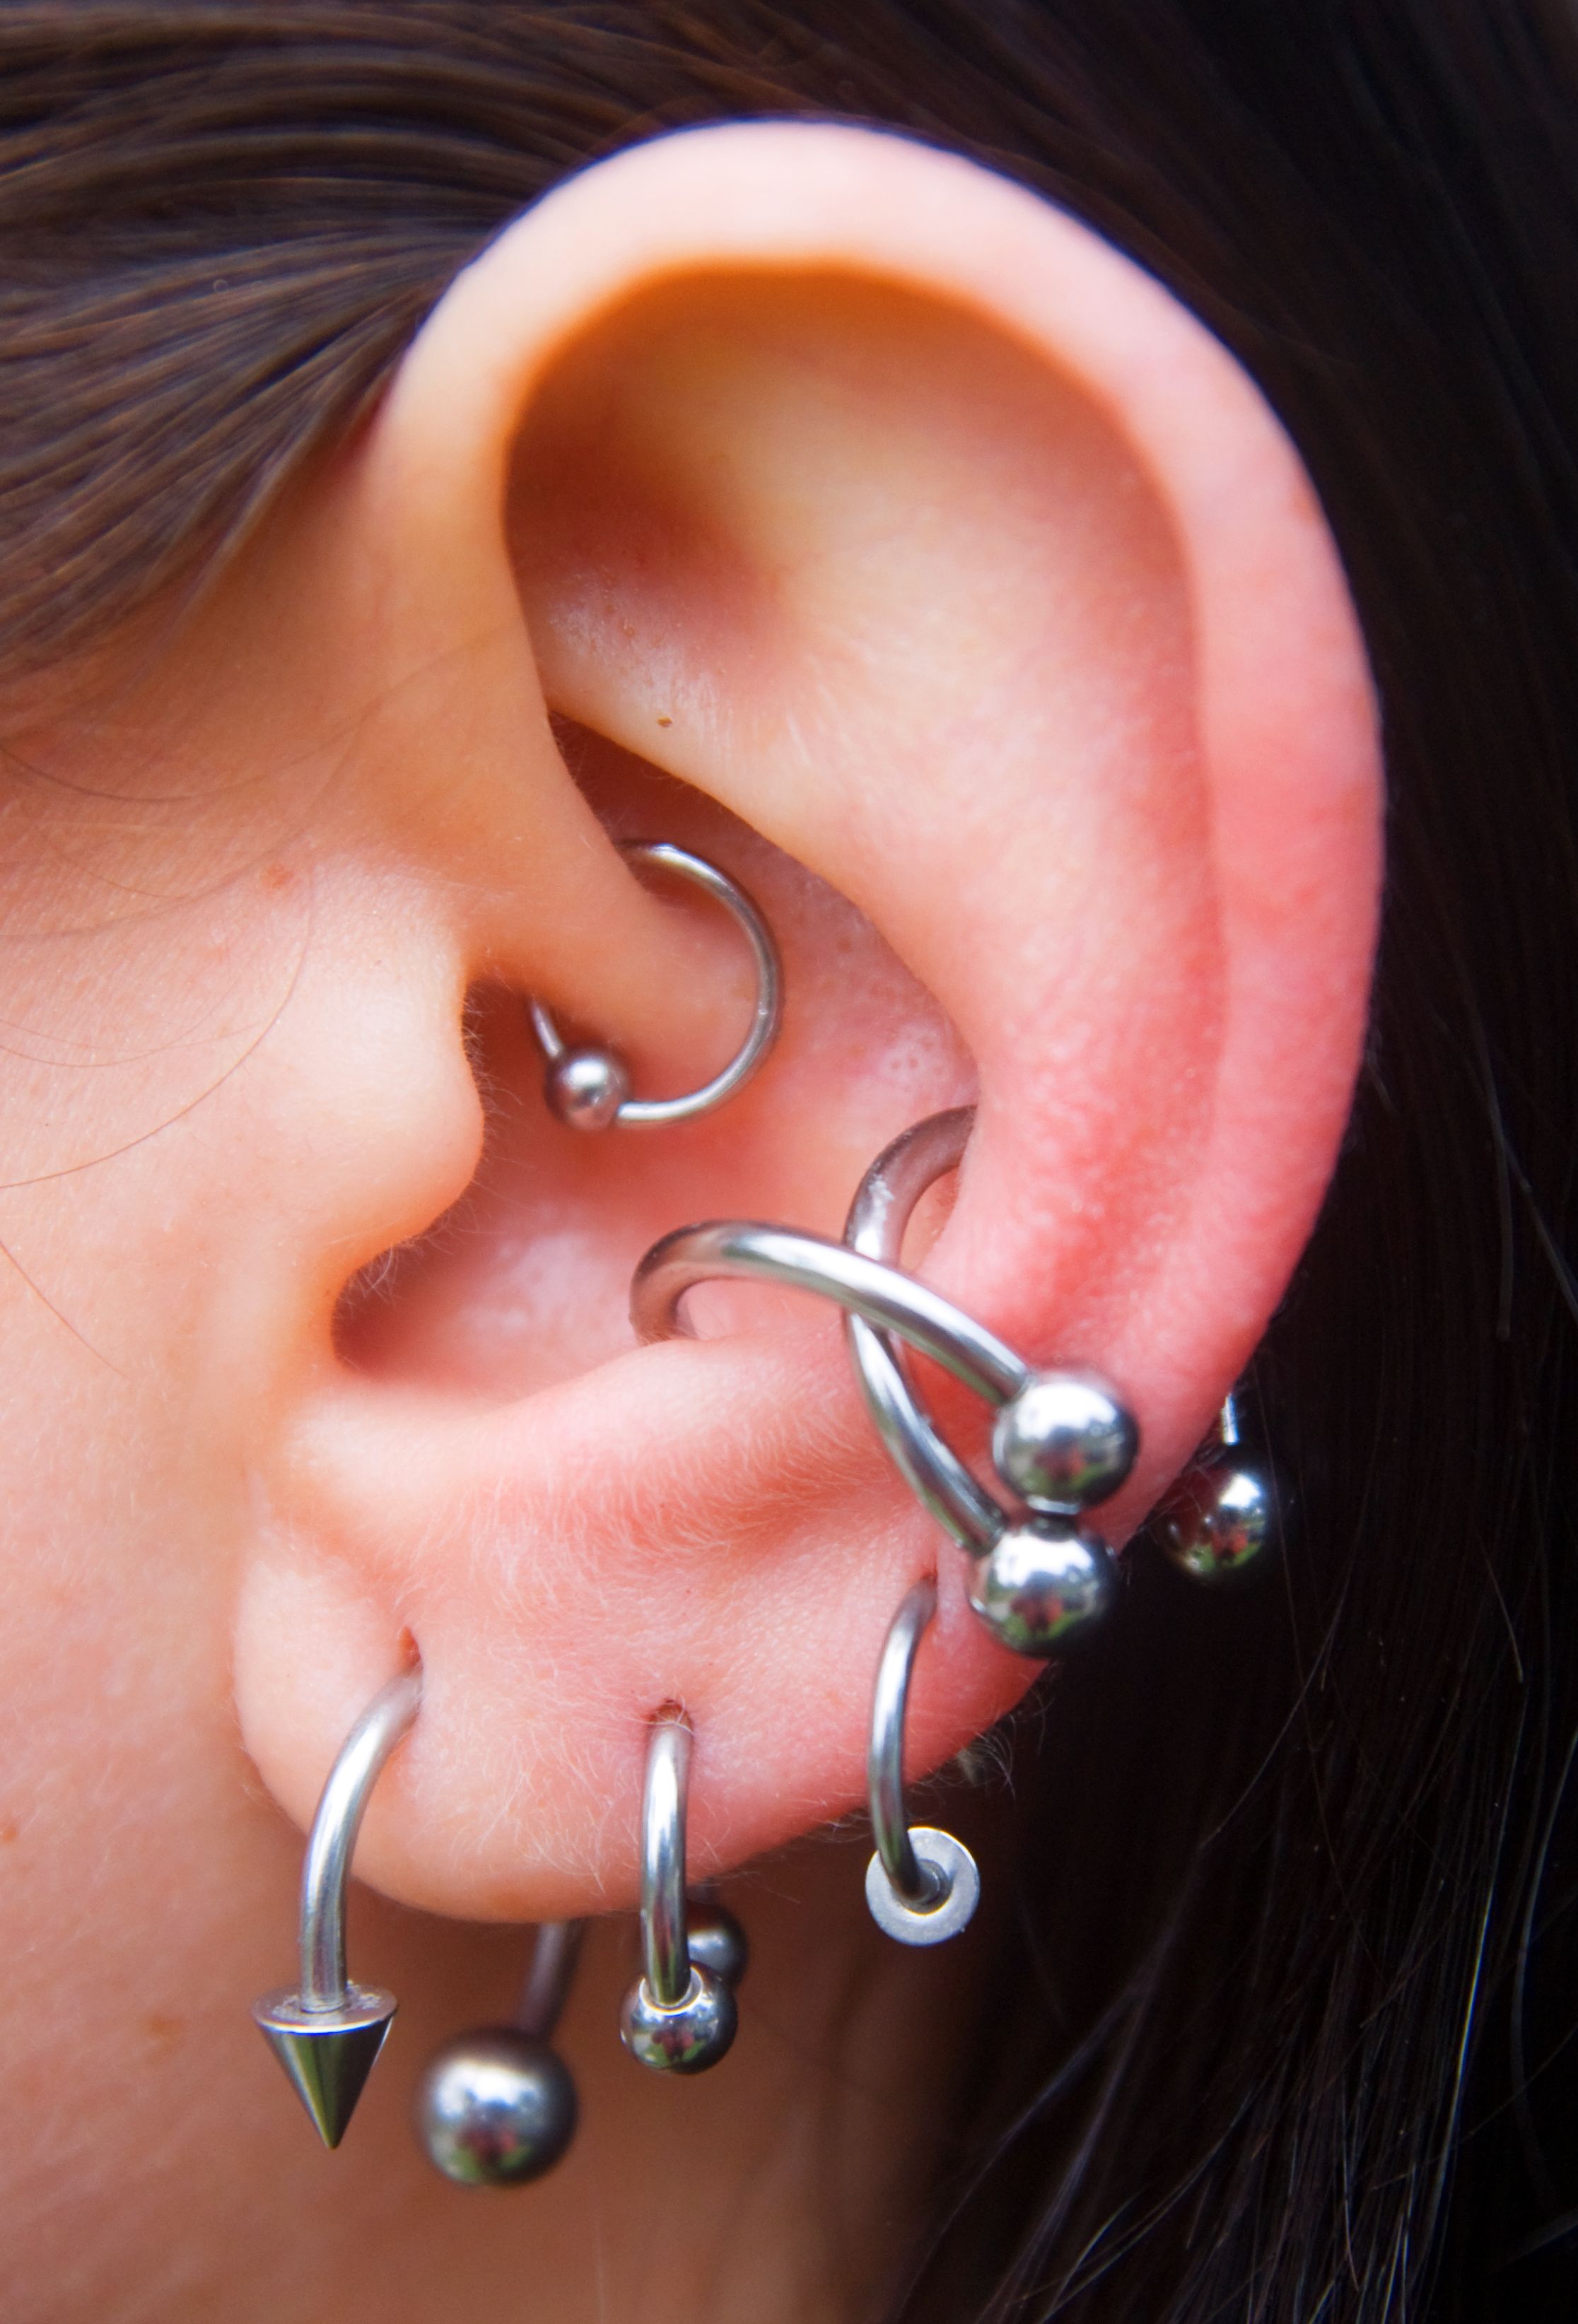 How To Treat Infected Ear Piercings, From Dermatologist